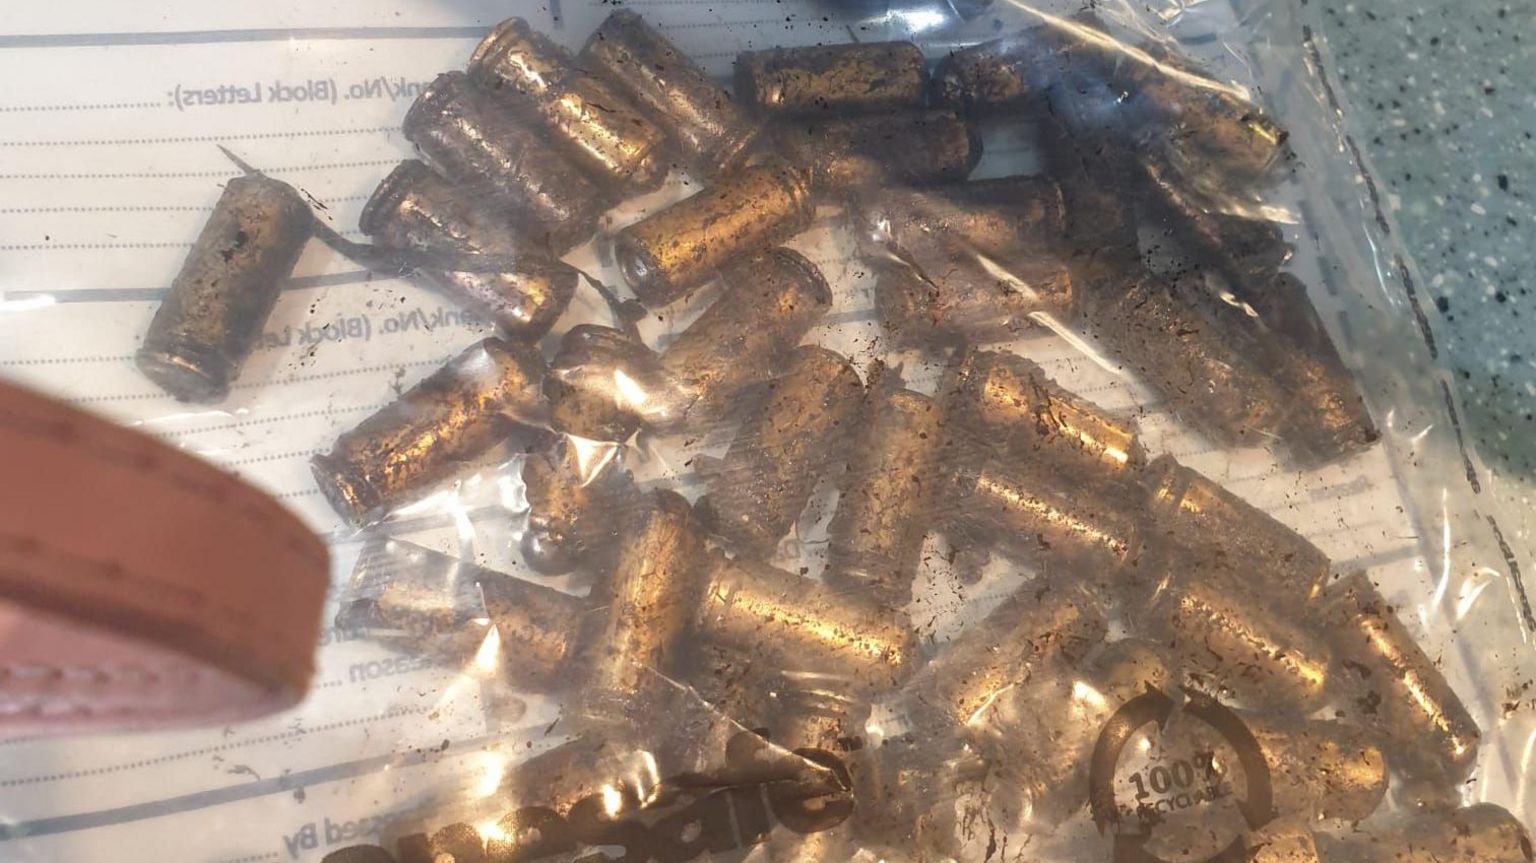 Bullets in a clear plastic bag after being pulled out of a canal